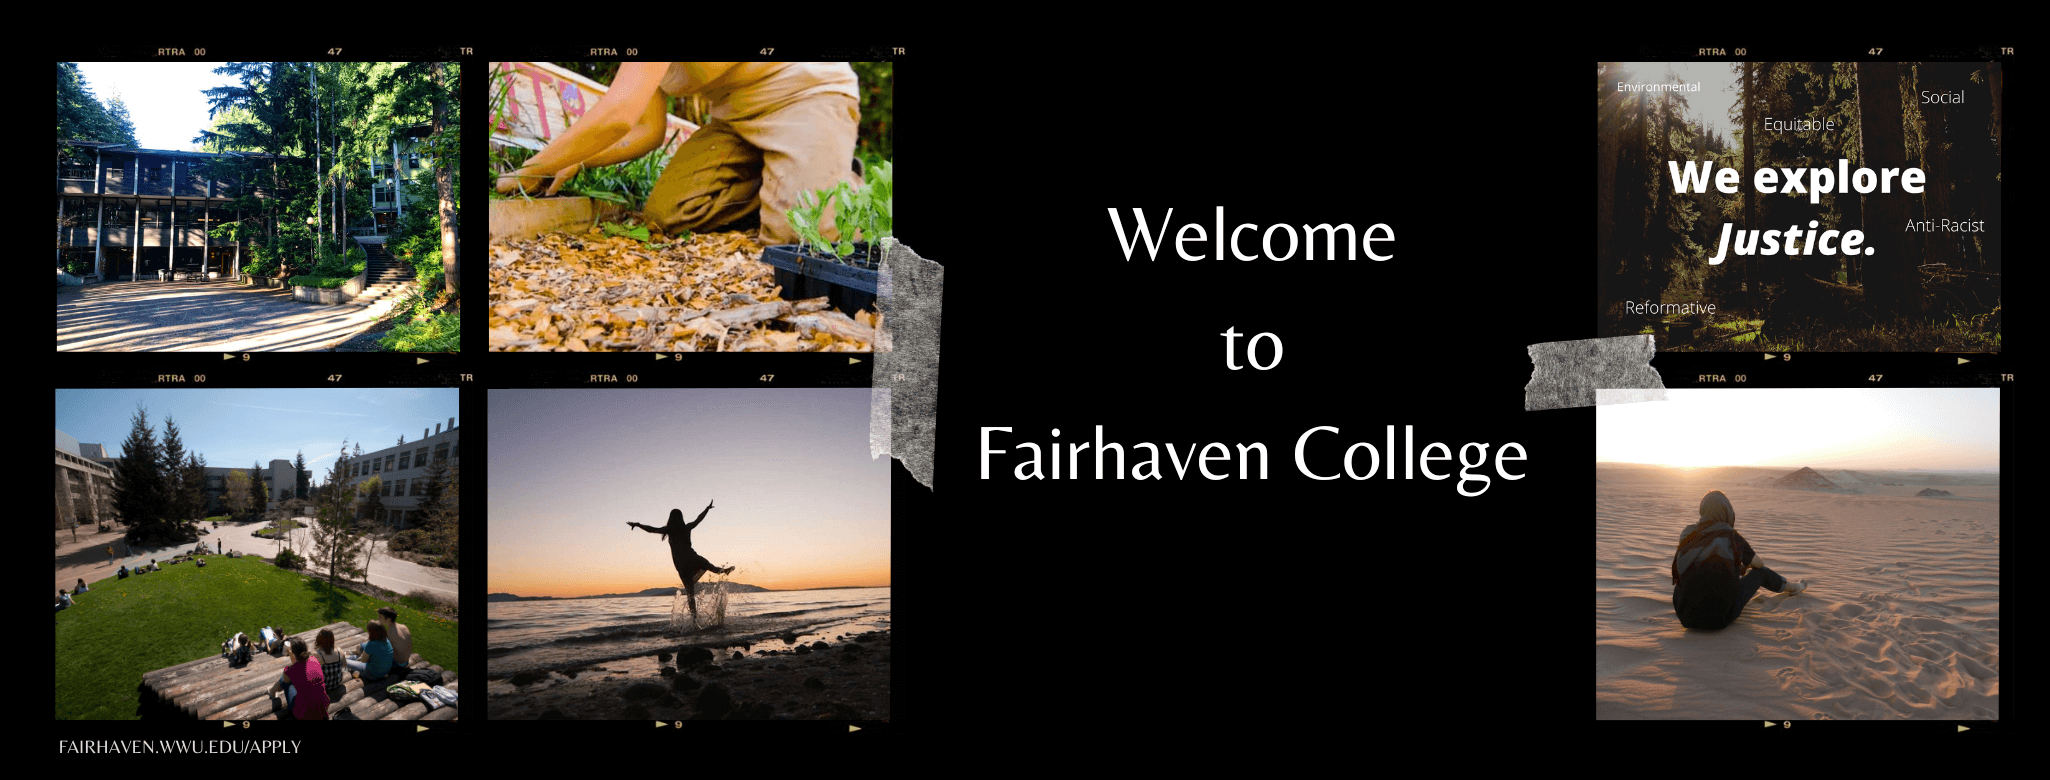 Welcome to Fairhaven. Collage of the Fairhaven college building, a woman planting small green plants, students relaxing on the lawn on a summer day and a young person splashing through the shore of Bellingham bay